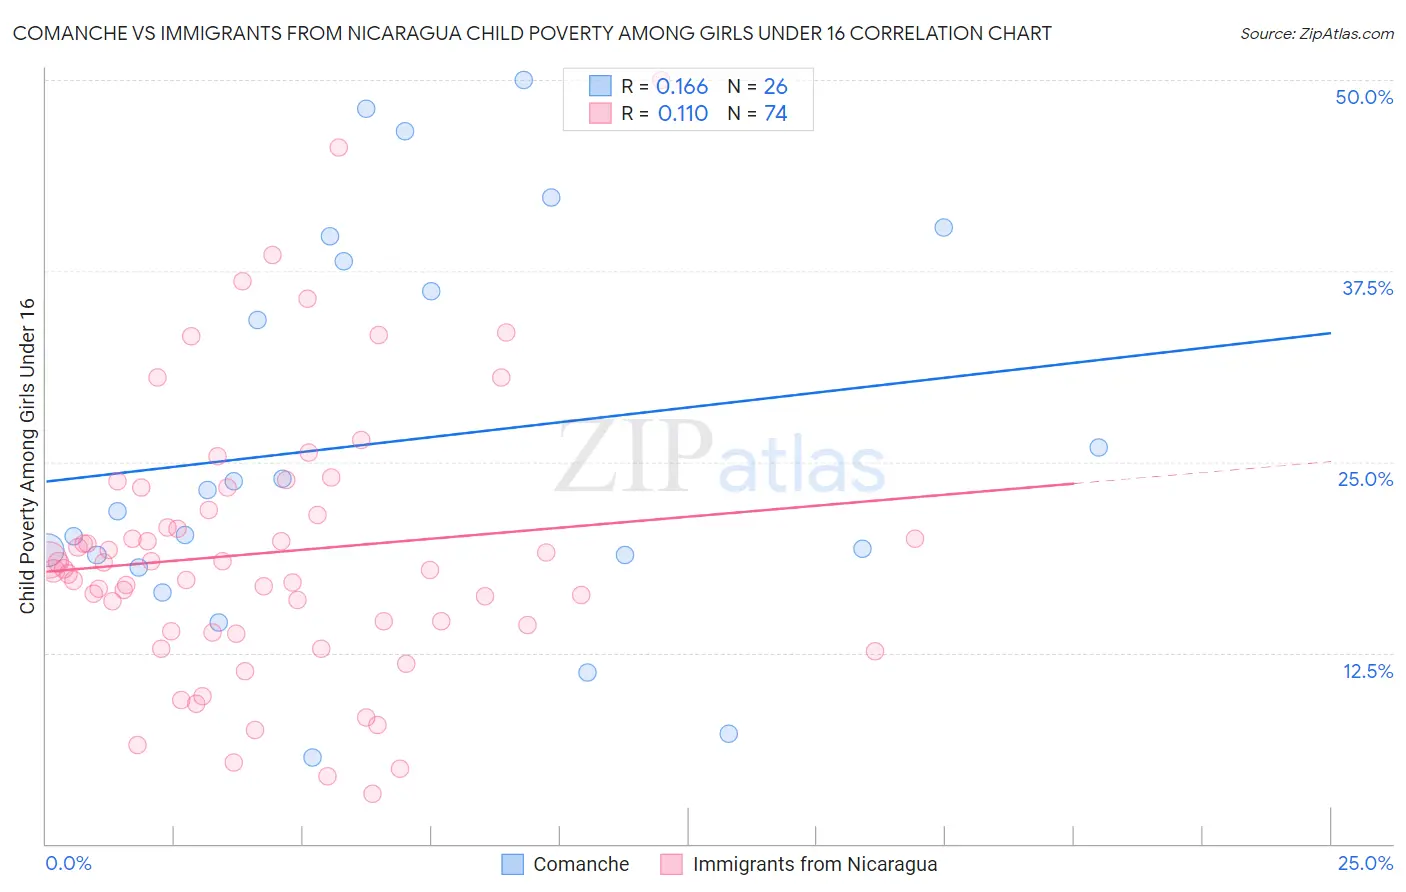 Comanche vs Immigrants from Nicaragua Child Poverty Among Girls Under 16